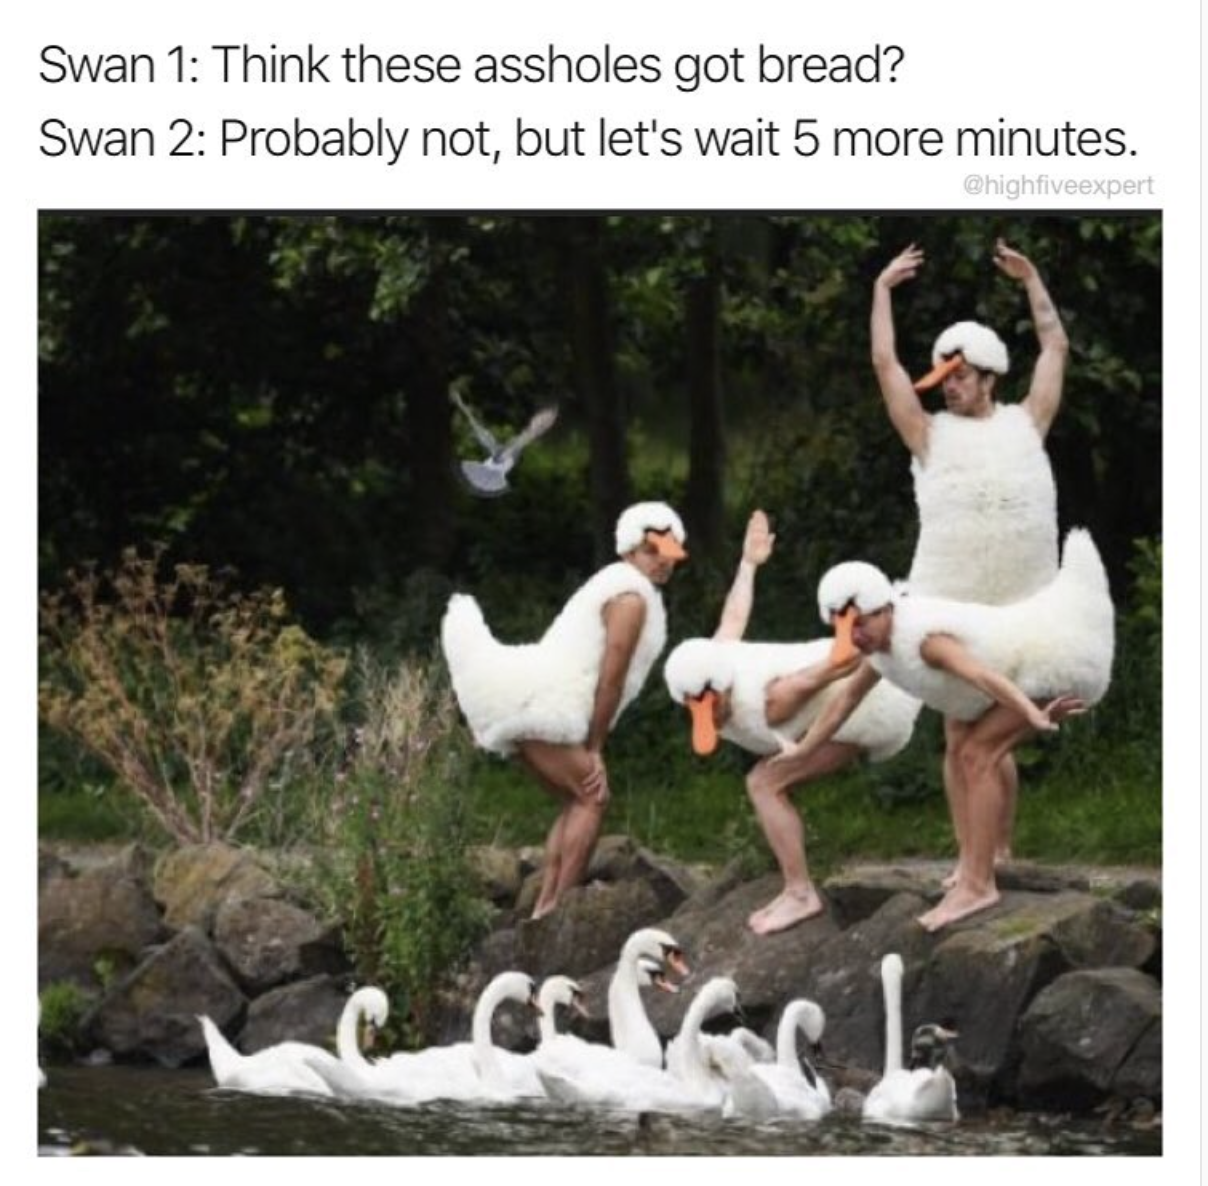 funny swans - Swan 1 Think these assholes got bread? Swan 2 Probably not, but let's wait 5 more minutes. Ve